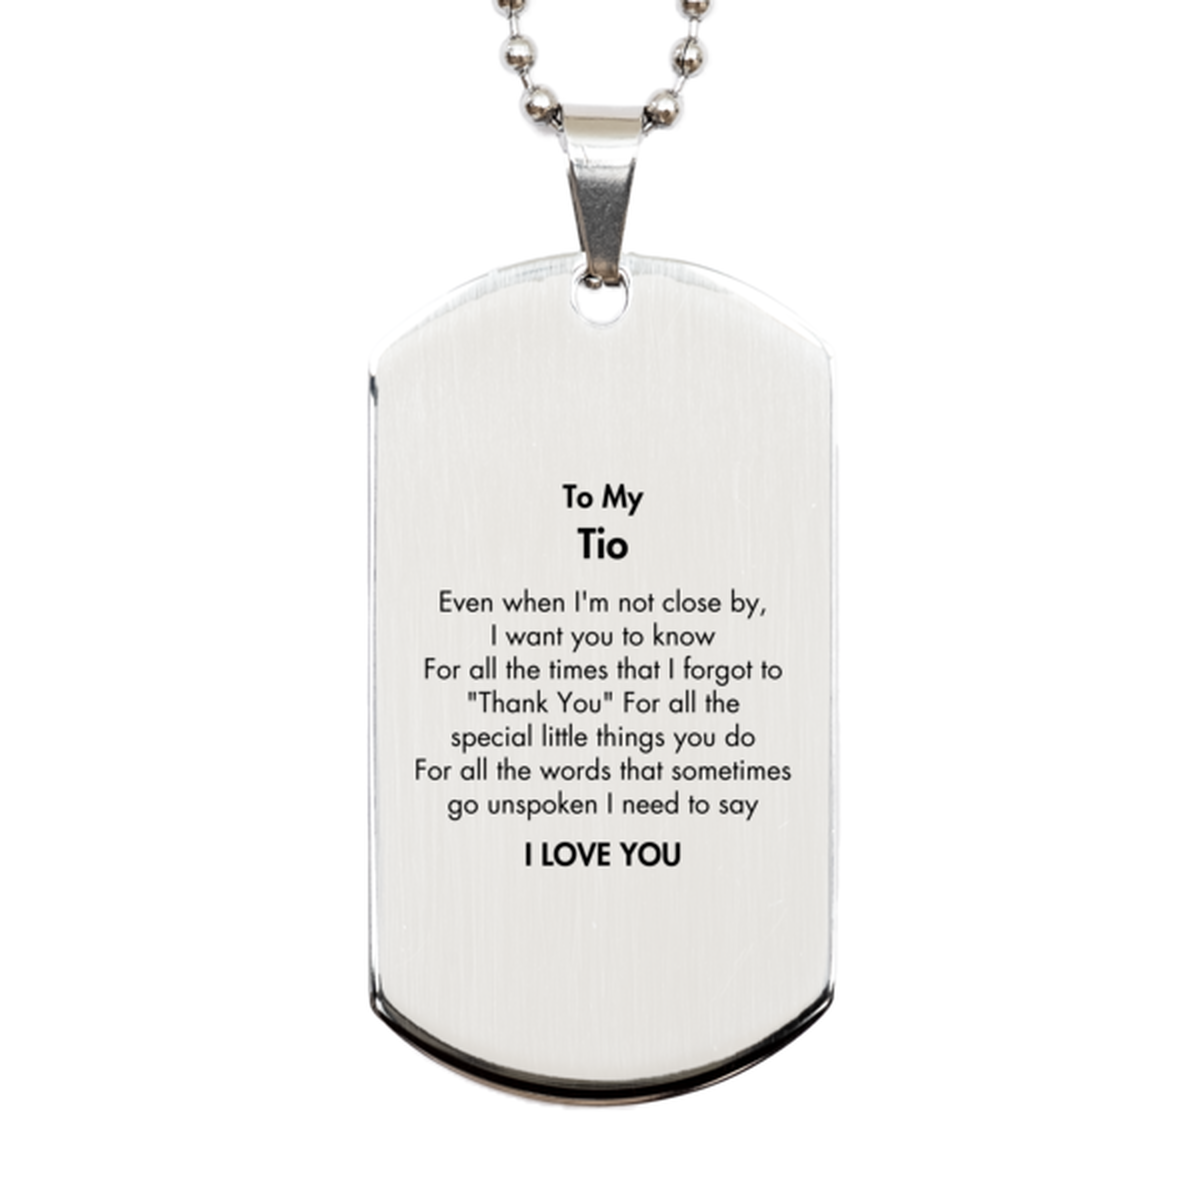 Thank You Gifts for Tio, Keepsake Silver Dog Tag Gifts for Tio Birthday Mother's day Father's Day Tio For all the words That sometimes go unspoken I need to say I LOVE YOU